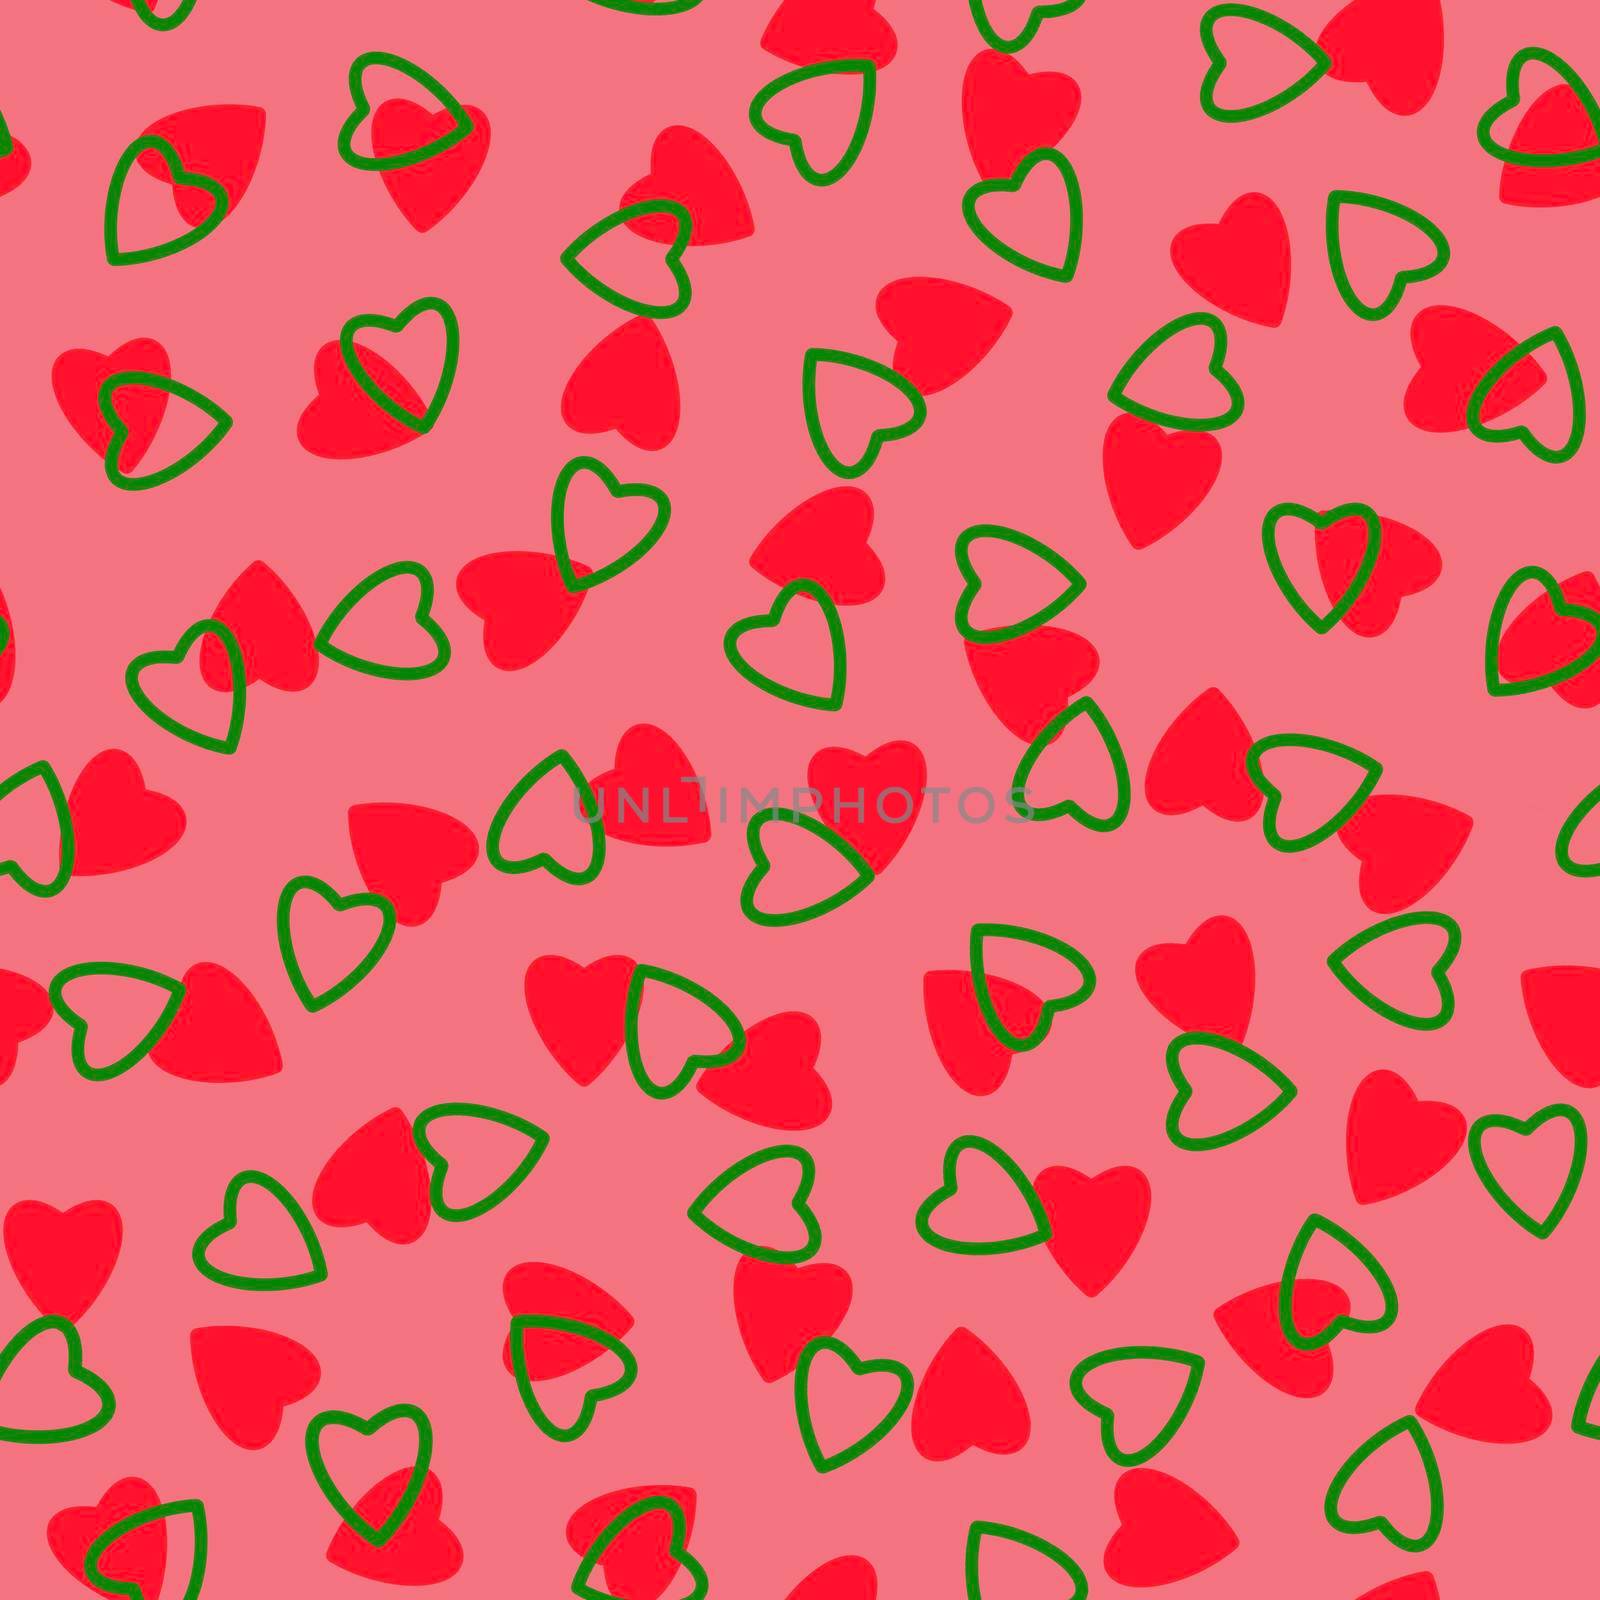 Simple hearts seamless pattern,endless chaotic texture made of tiny heart silhouettes.Valentines,mothers day background.Great for Easter,wedding,scrapbook,gift wrapping paper,textiles.Red,green,pink by Angelsmoon